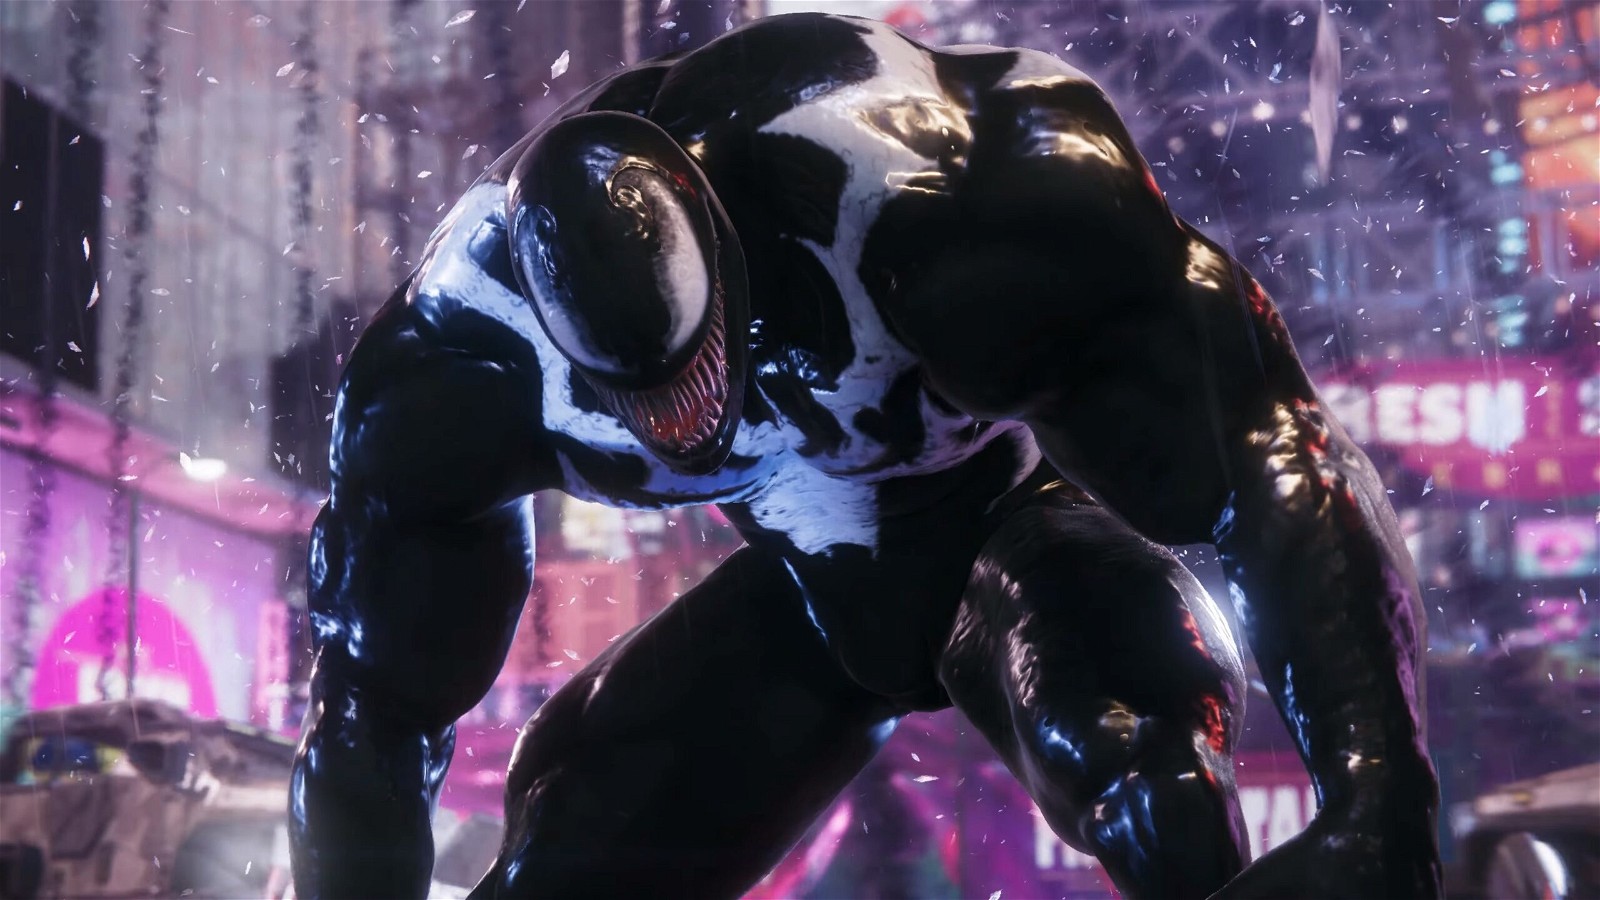 Insomniac has nailed the 'strong' look for Venom in Marvel's Spider-Man 2